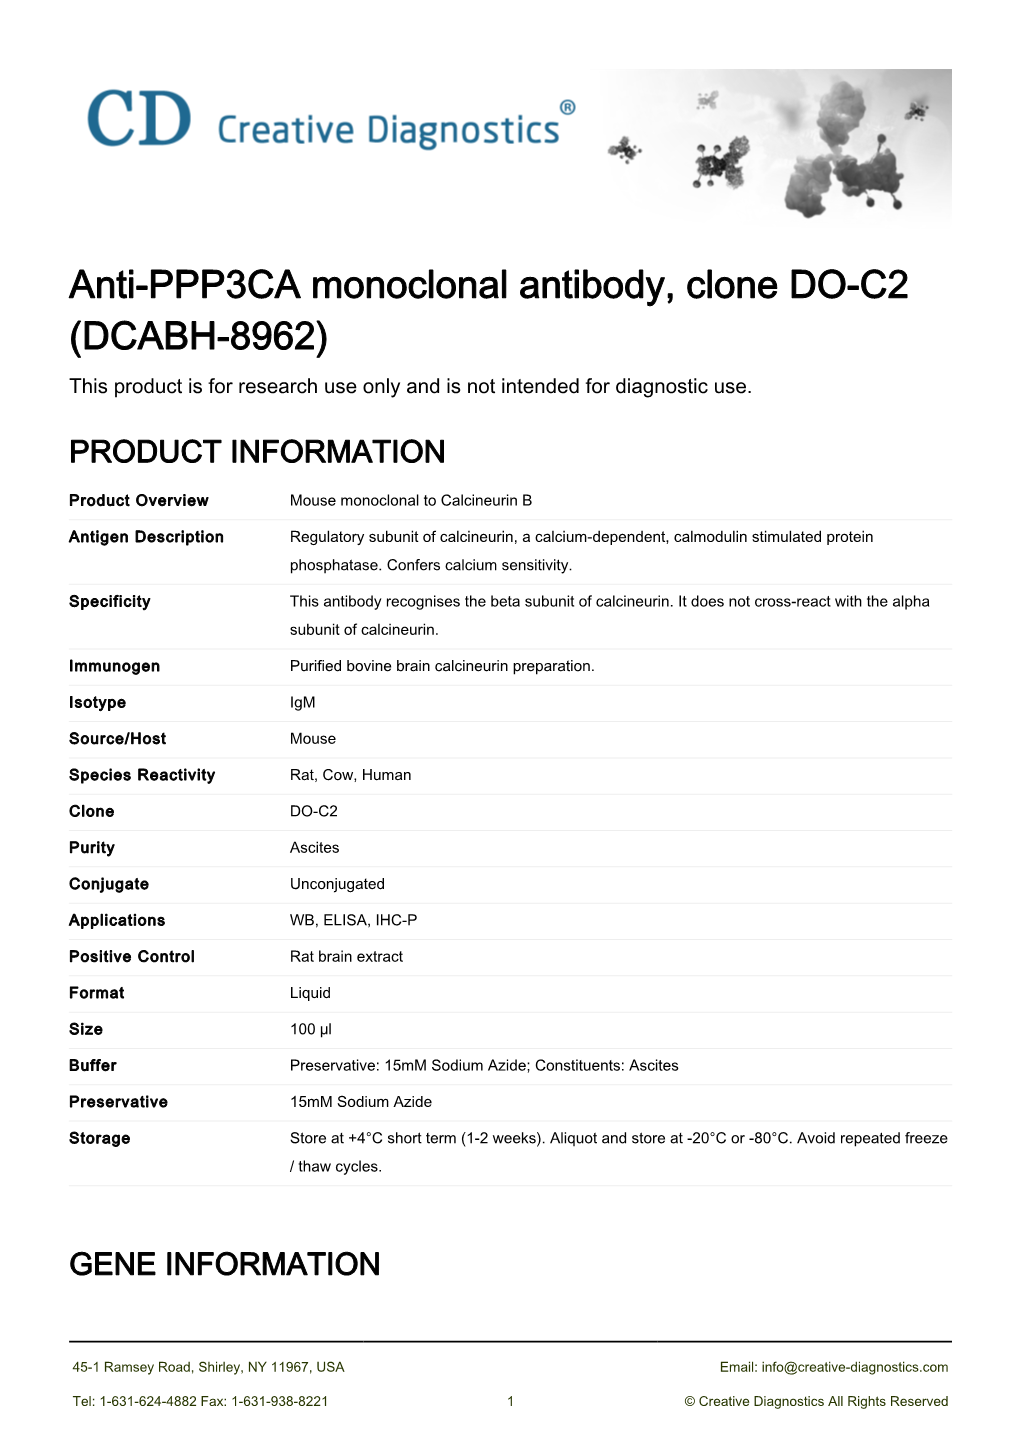 Anti-PPP3CA Monoclonal Antibody, Clone DO-C2 (DCABH-8962) This Product Is for Research Use Only and Is Not Intended for Diagnostic Use